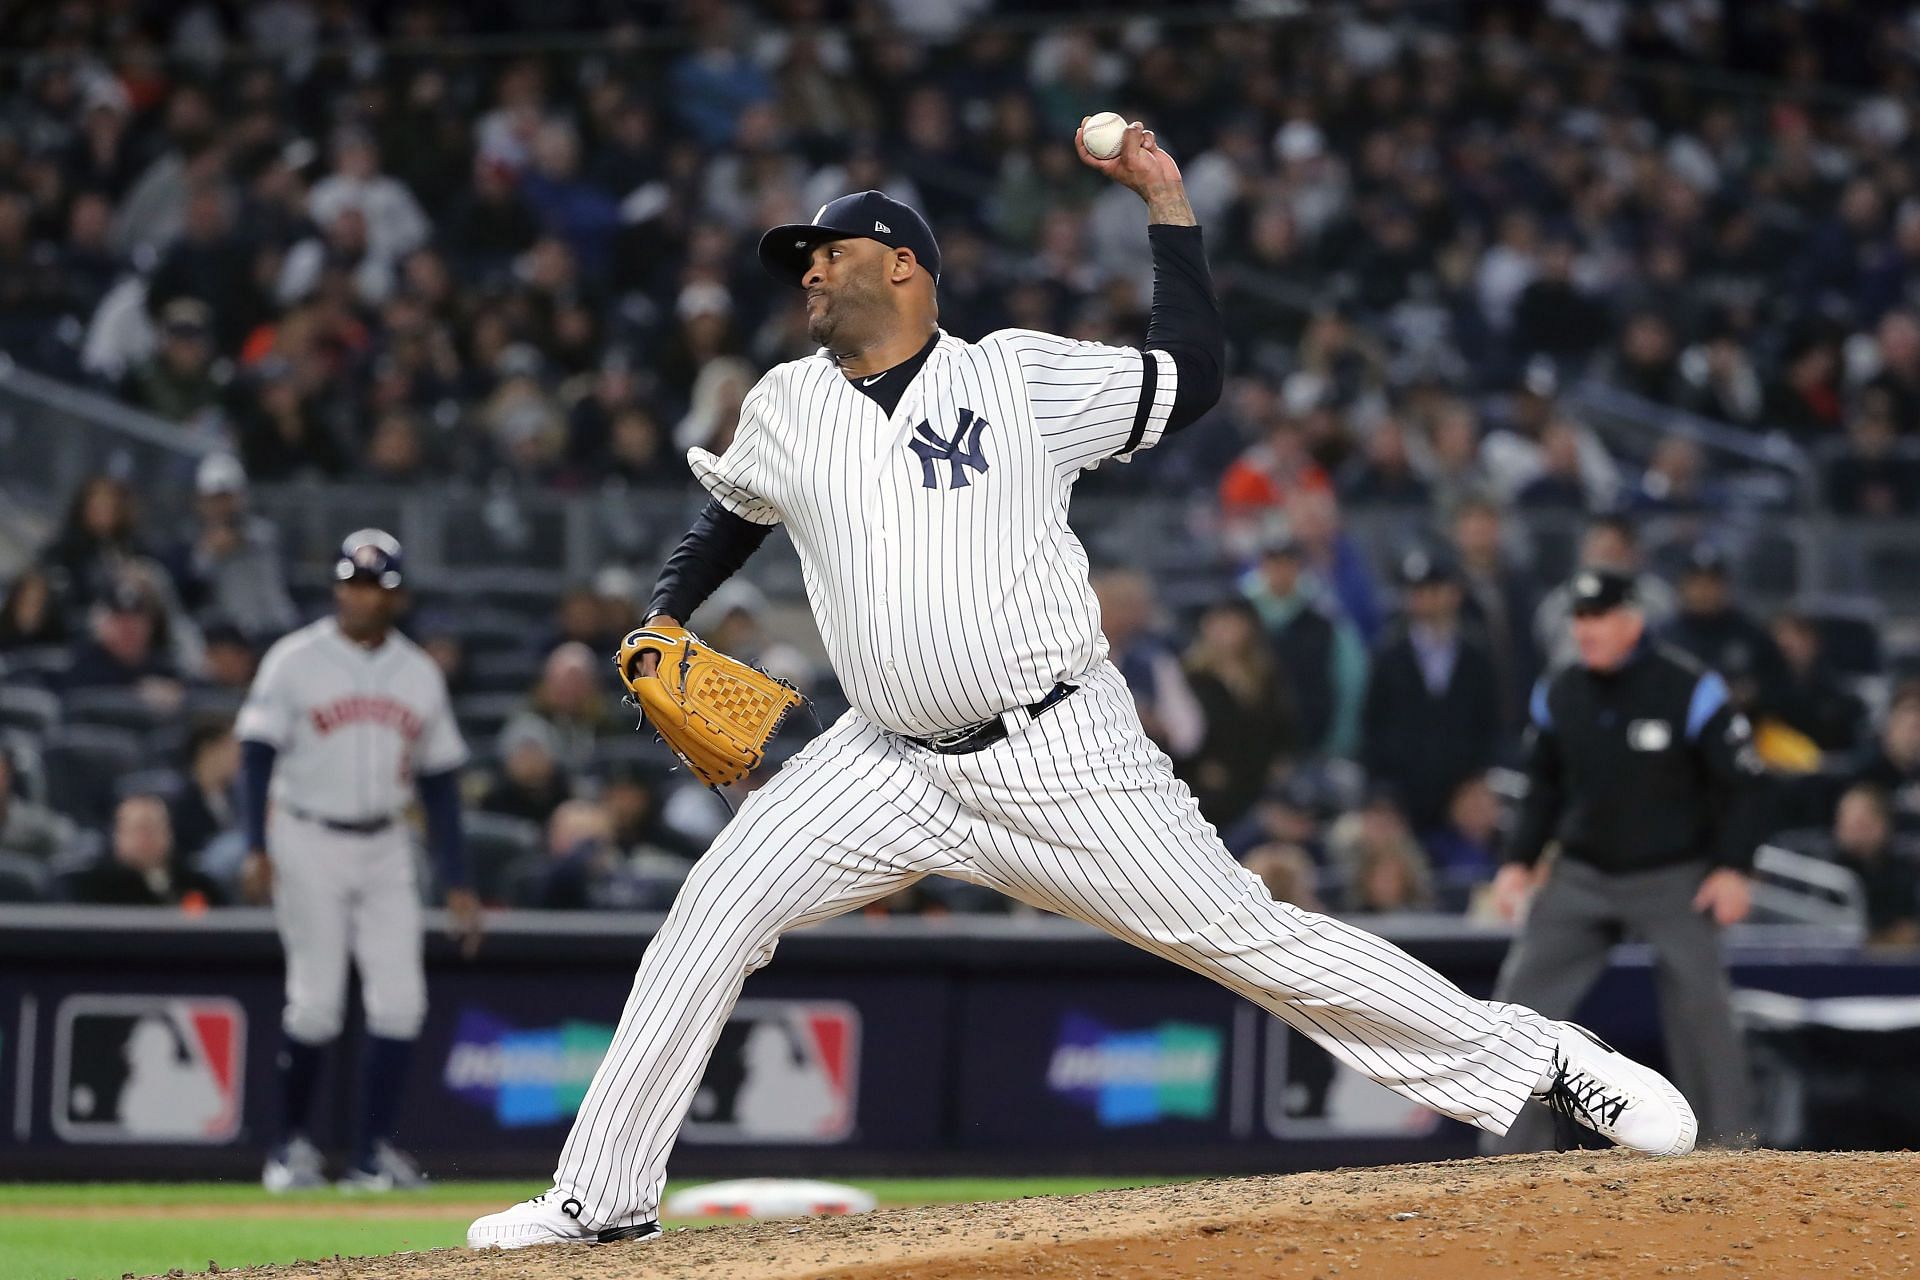 C.C. Sabathia #52 of the New York Yankees delivers the pitch against the Houston Astros.